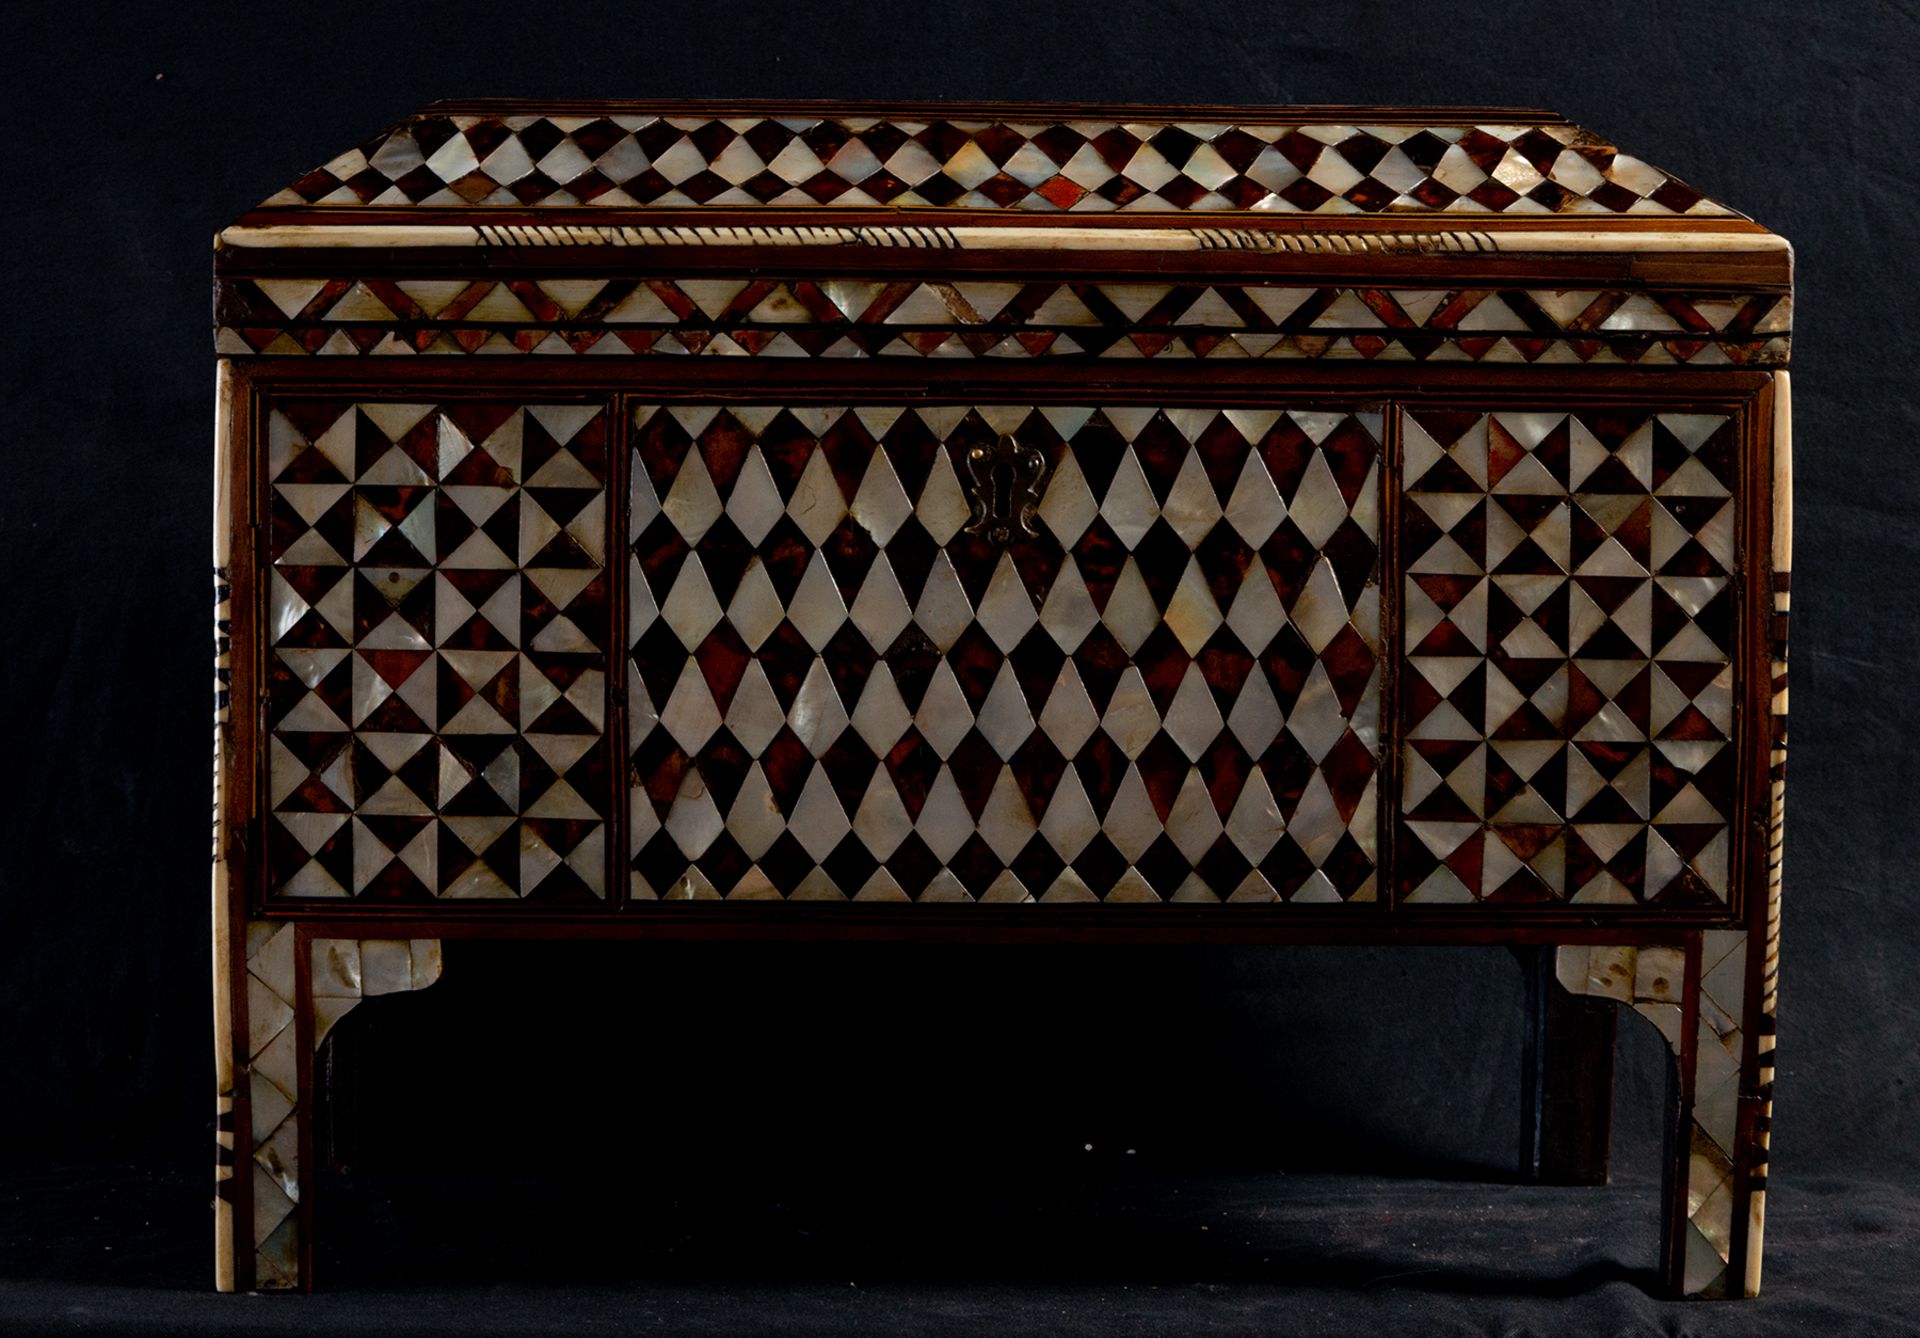 Exceptional Large 18th century Ottoman Chest in mother-of-pearl and tortoiseshell geometric inlay, 1